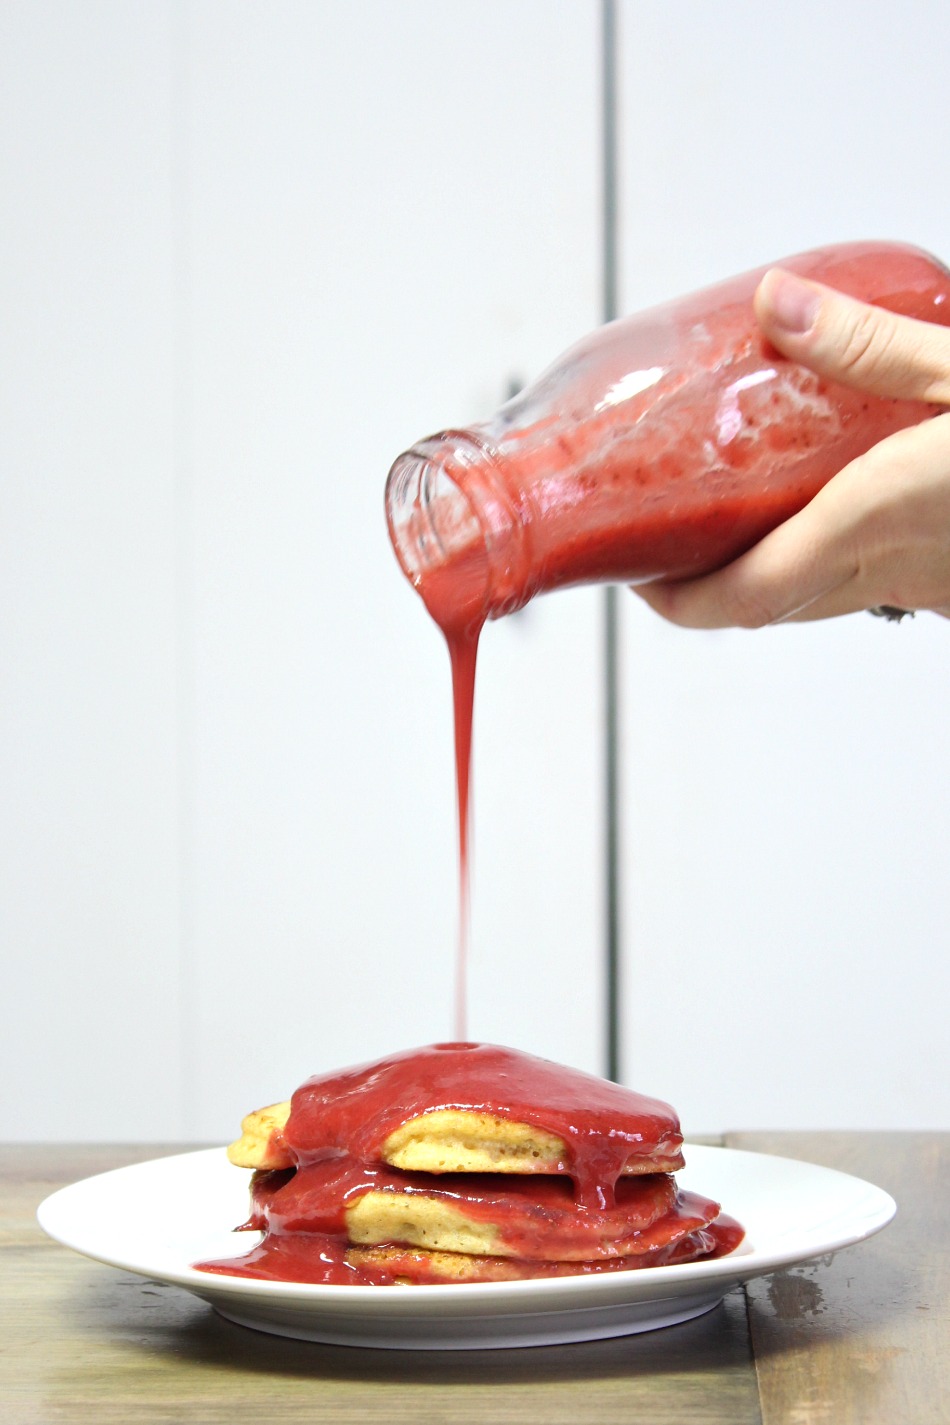 Fluffy Ricotta Pancakes With Homemade Strawberry Syrup | Growing Up Herbal | Wanna know what our favorite pancake and homemade syrup recipes are? Get them in today's post, and pin it to your Pinterest boards for safe keeping!